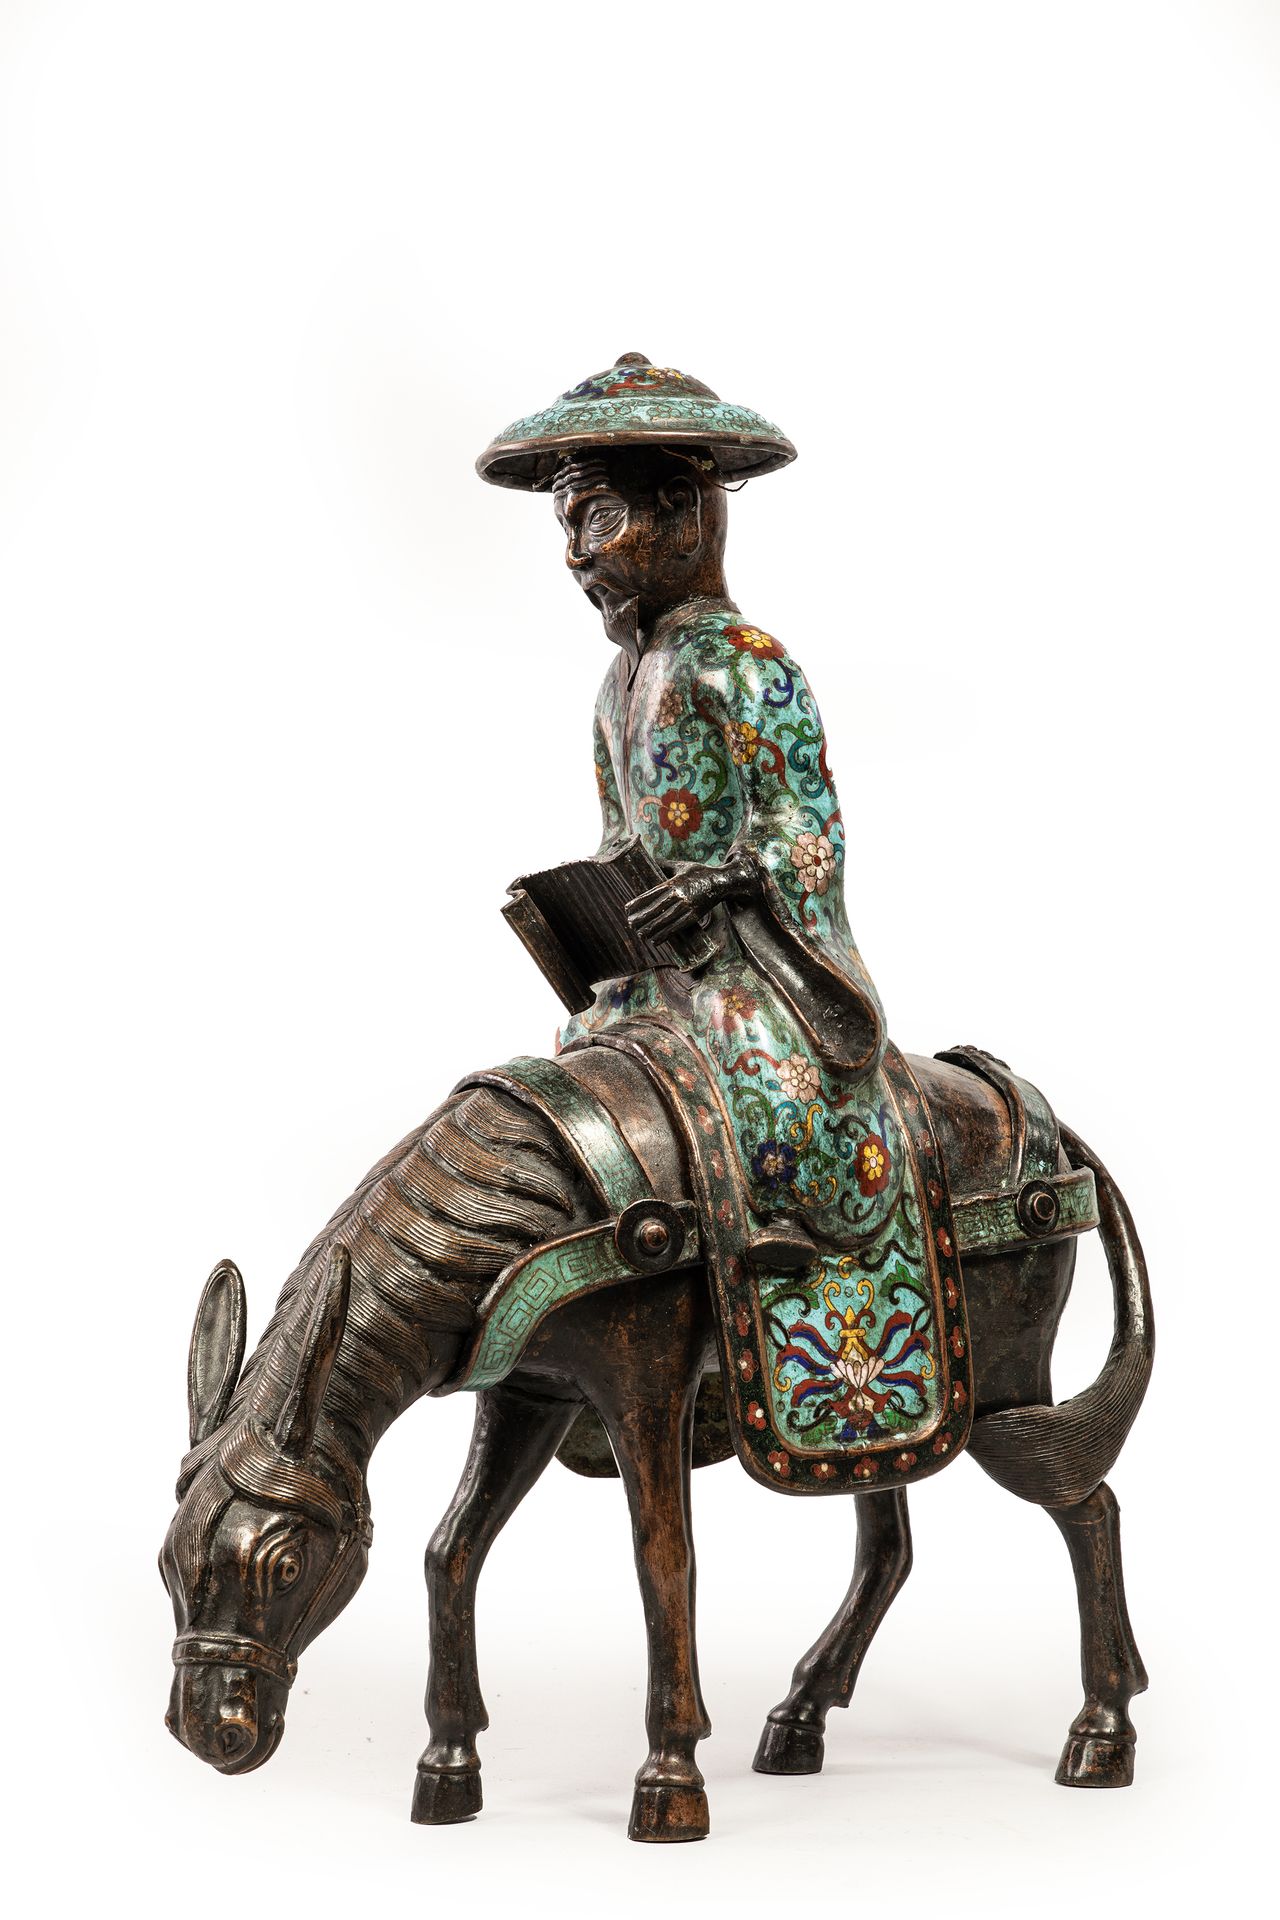 Null 
Toba on his mule, in cloisonné copper. China 20th century